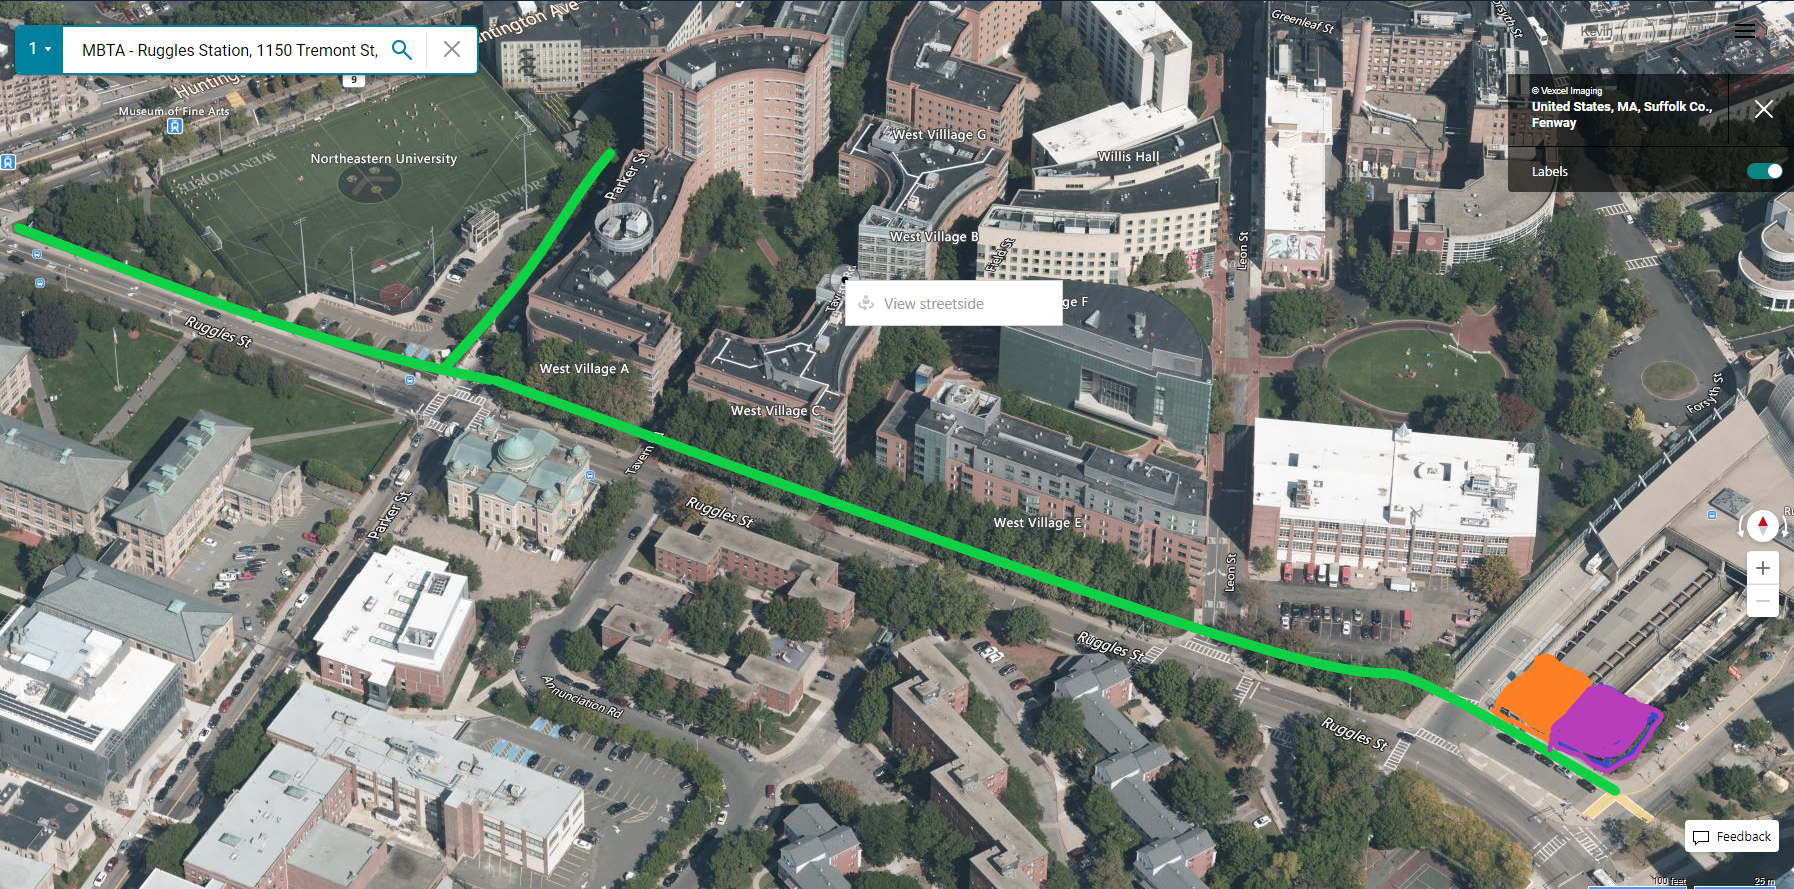 ruggles-st-multiuse-path.png